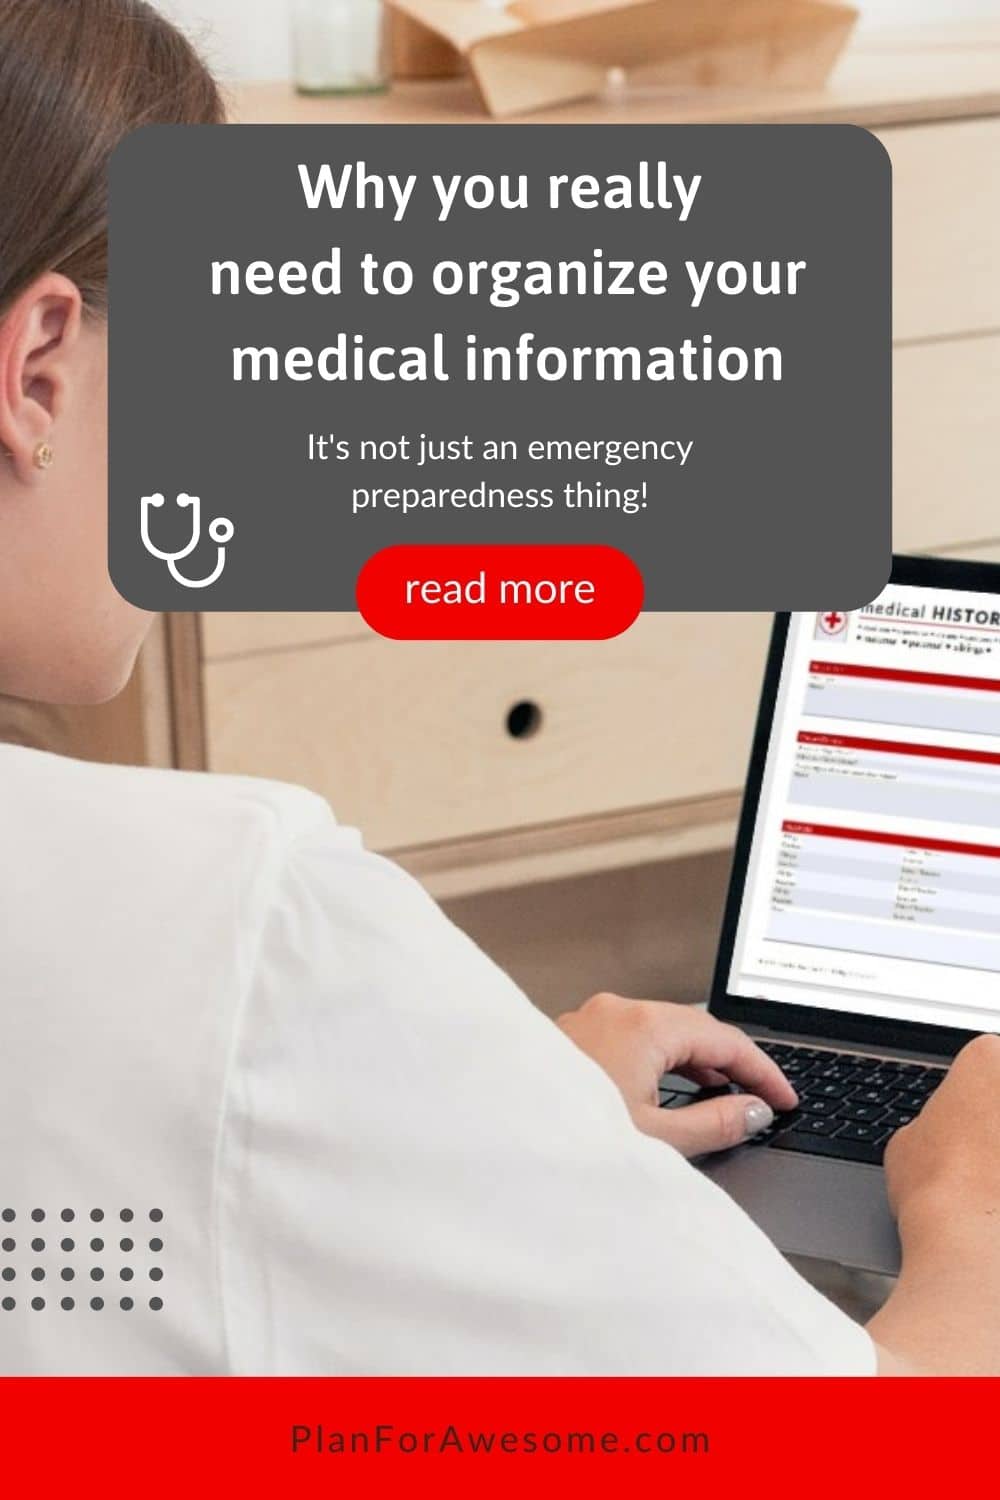 How to Organize Your Medical Information